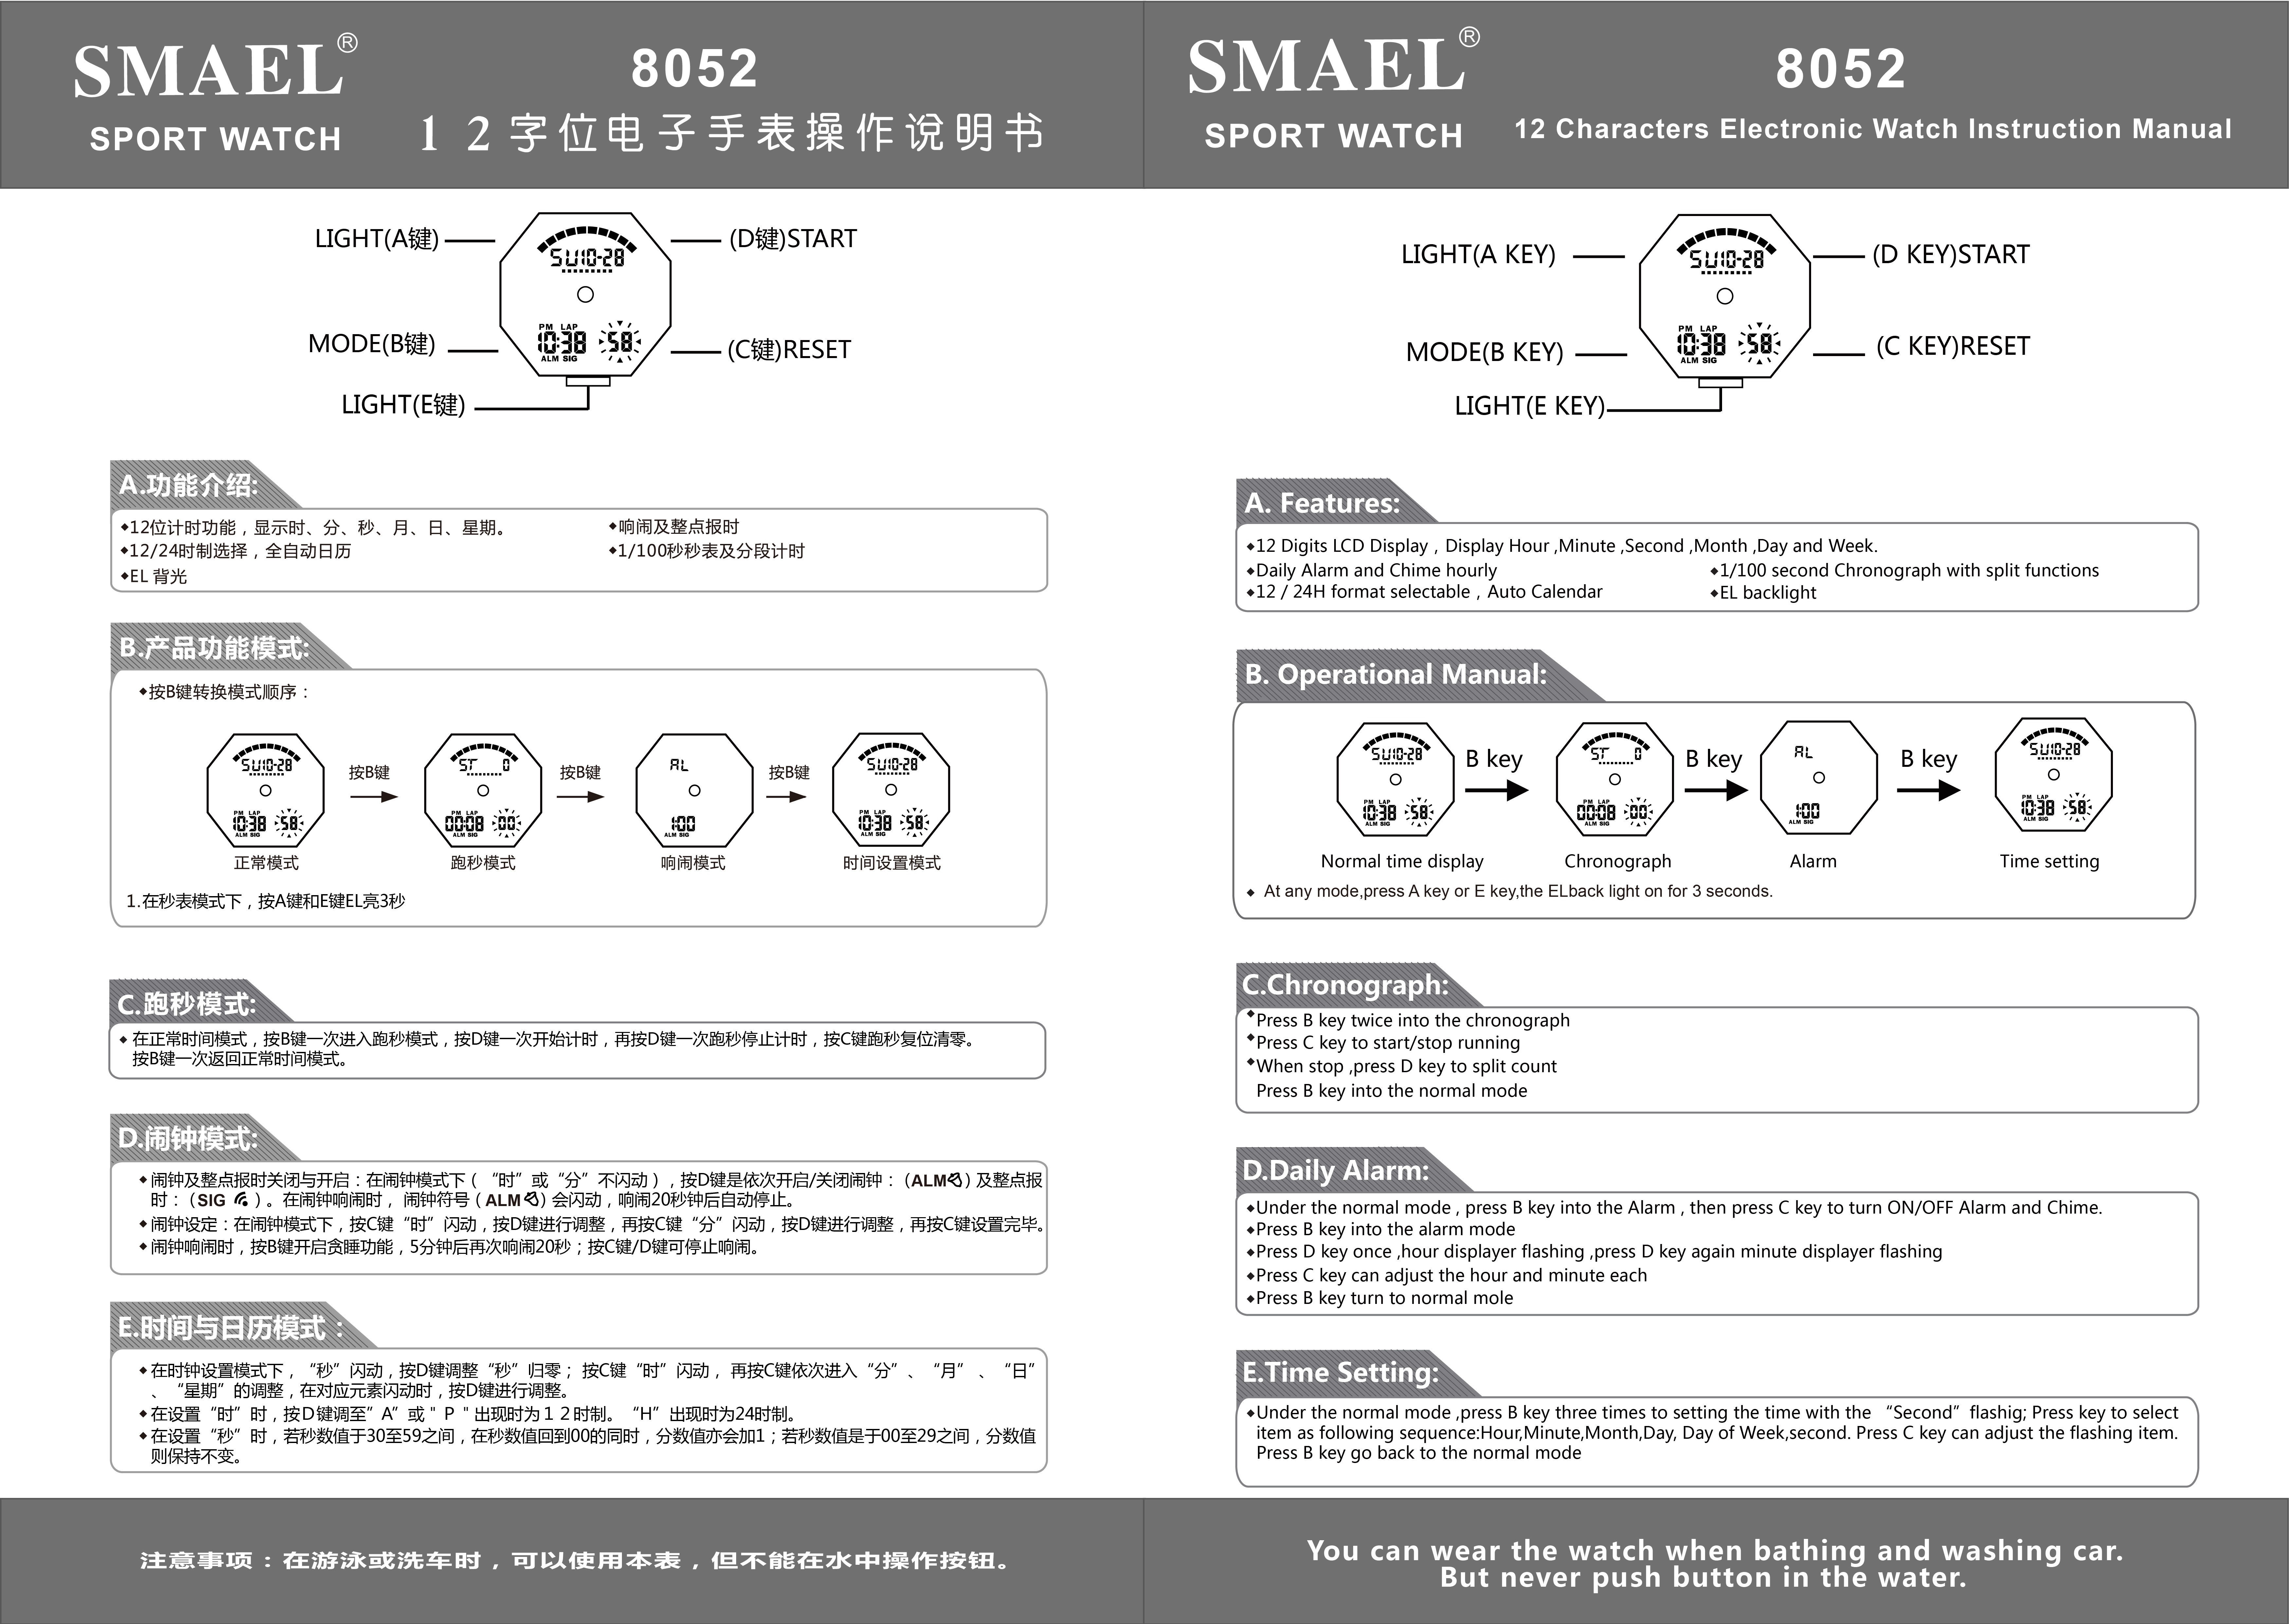 8052 instructions in English and Chinese 12